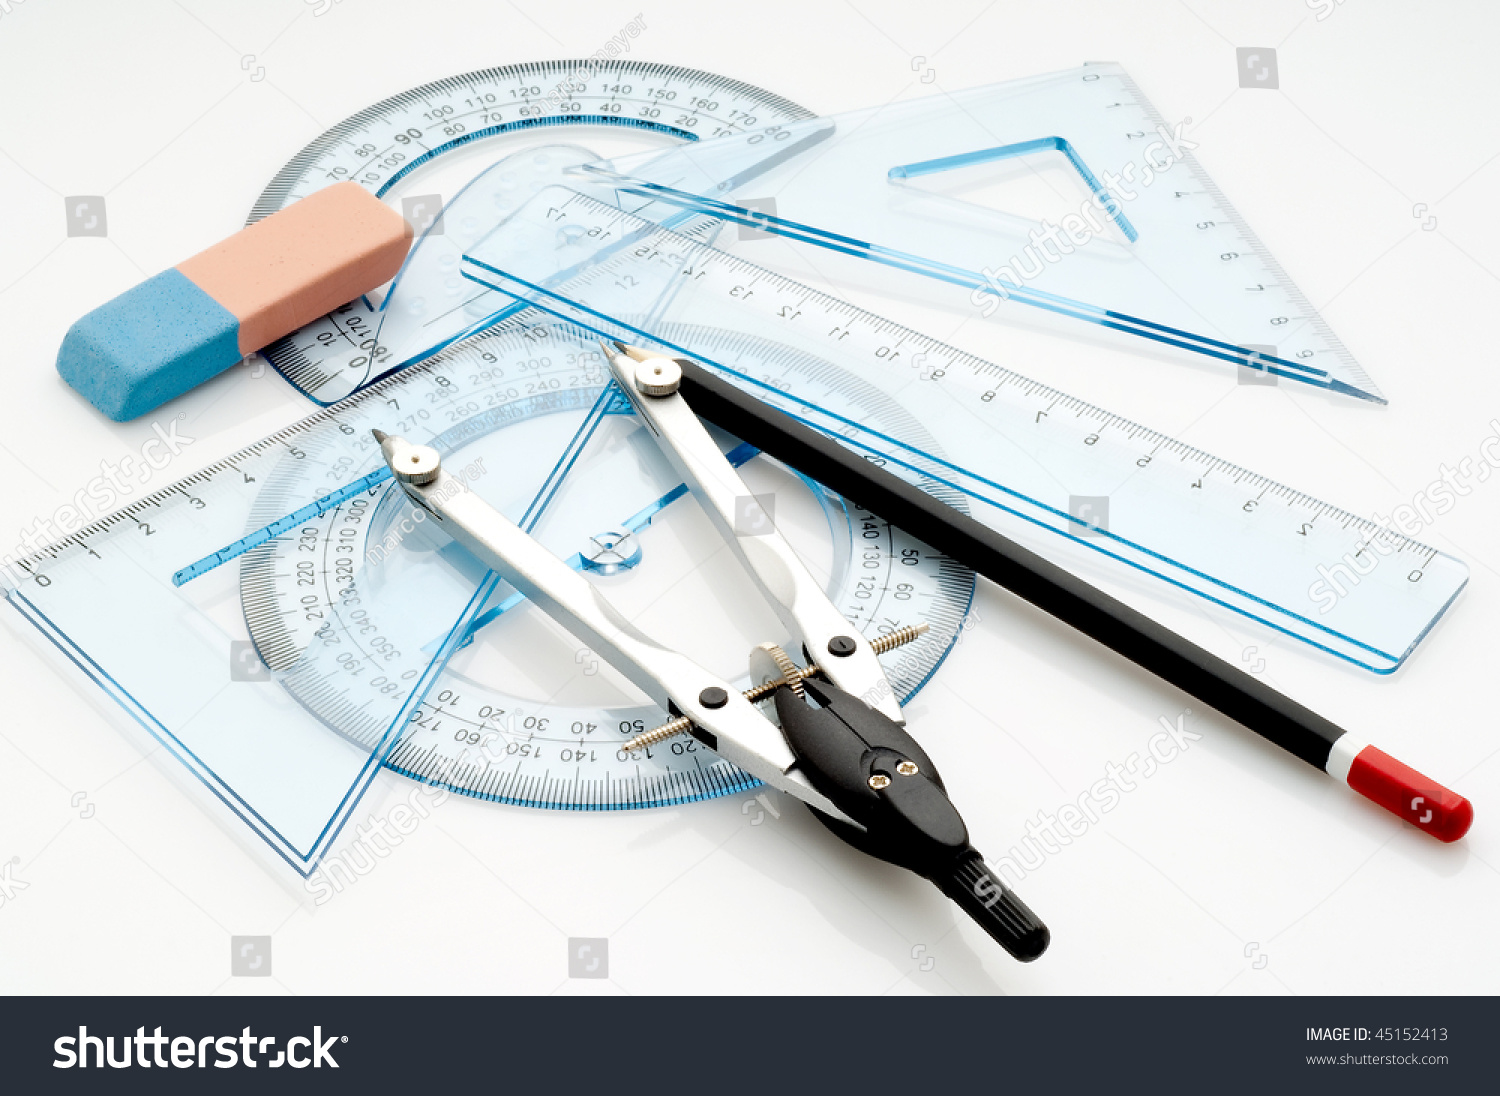 Technical Drawing Instruments Stock Photo (Edit Now) 45152413